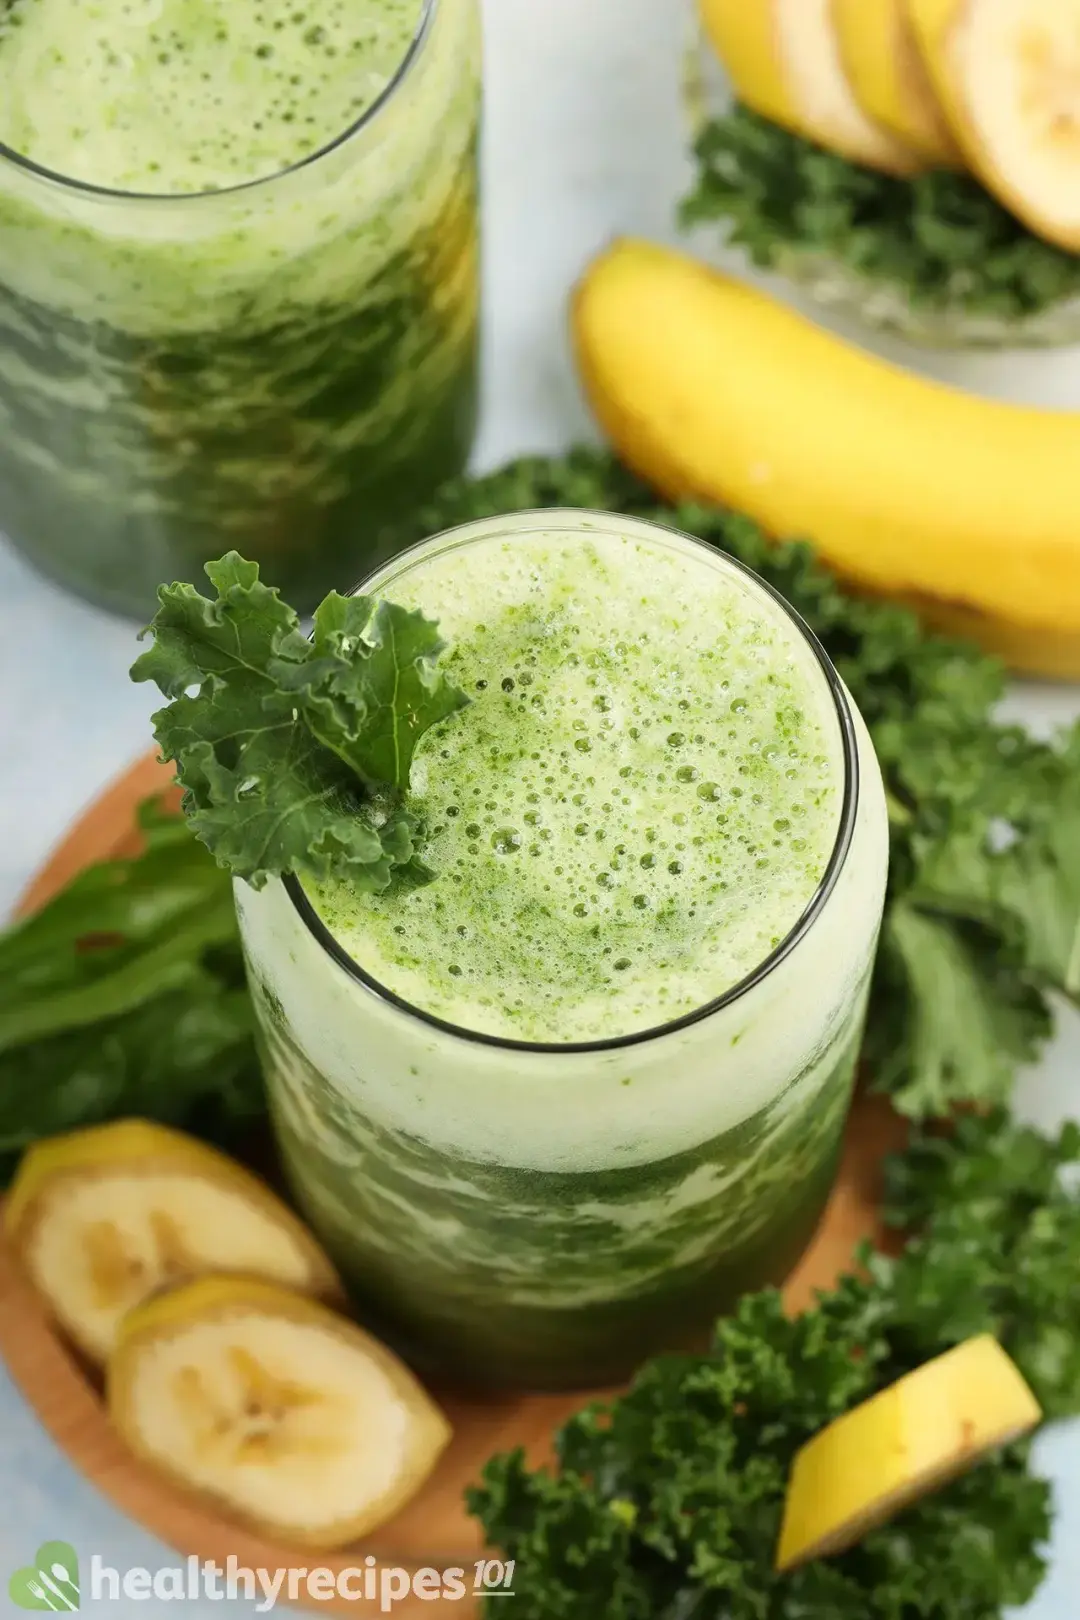 Benefits of Spinach in kale spinach smoothie